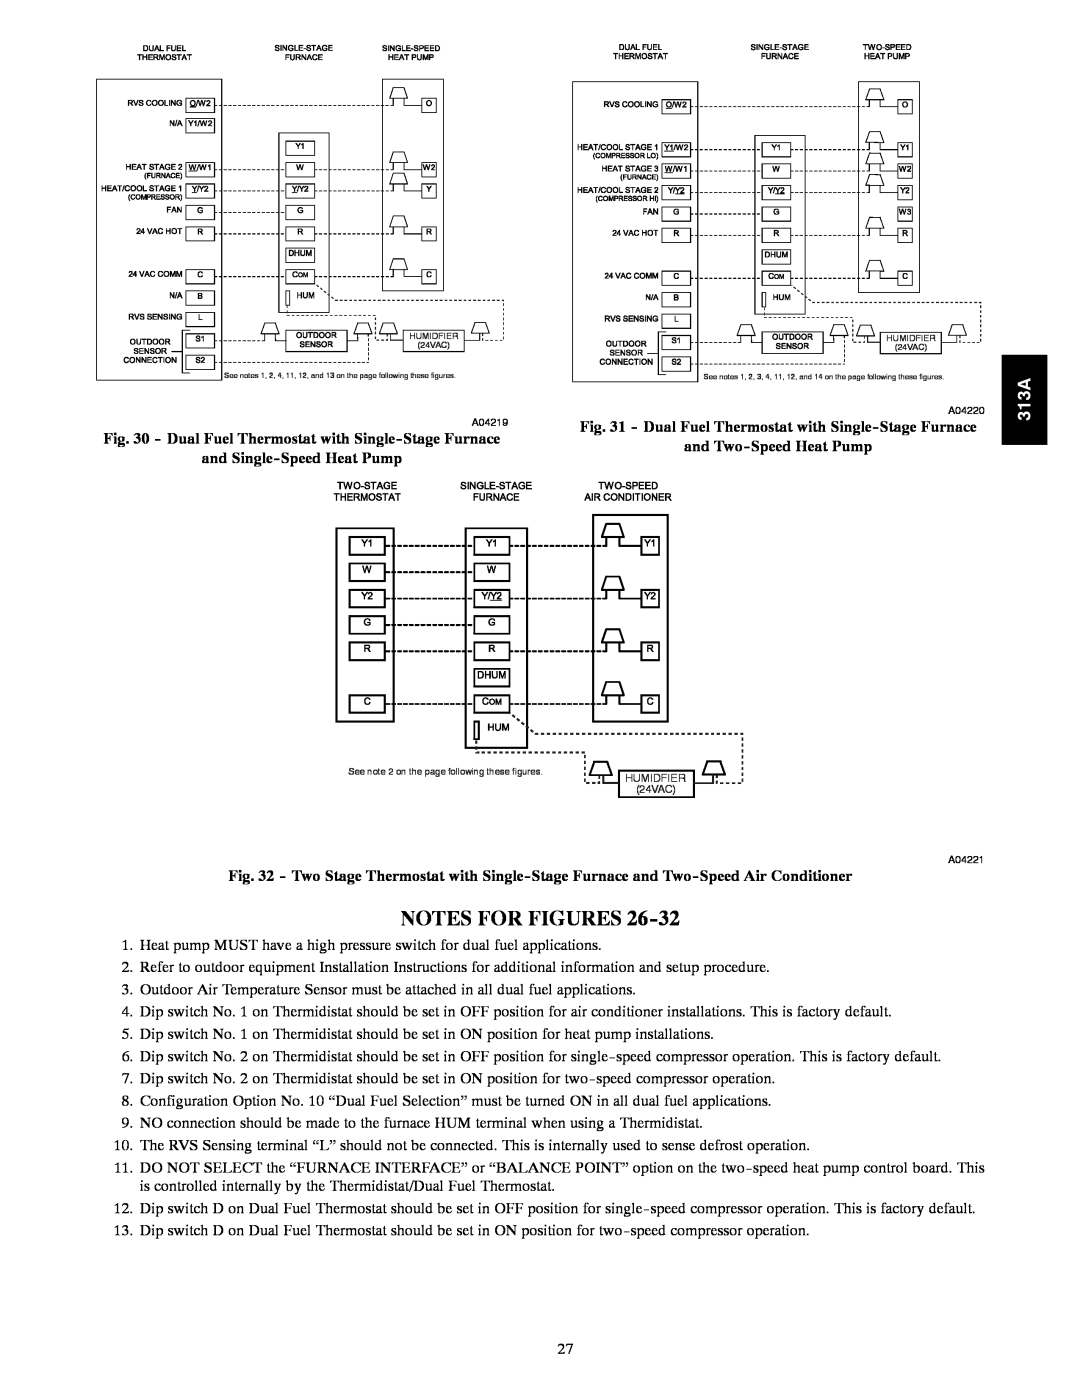 Bryant 313AAV instruction manual Notes For Figures, and Single-SpeedHeat Pump, and Two-SpeedHeat Pump 